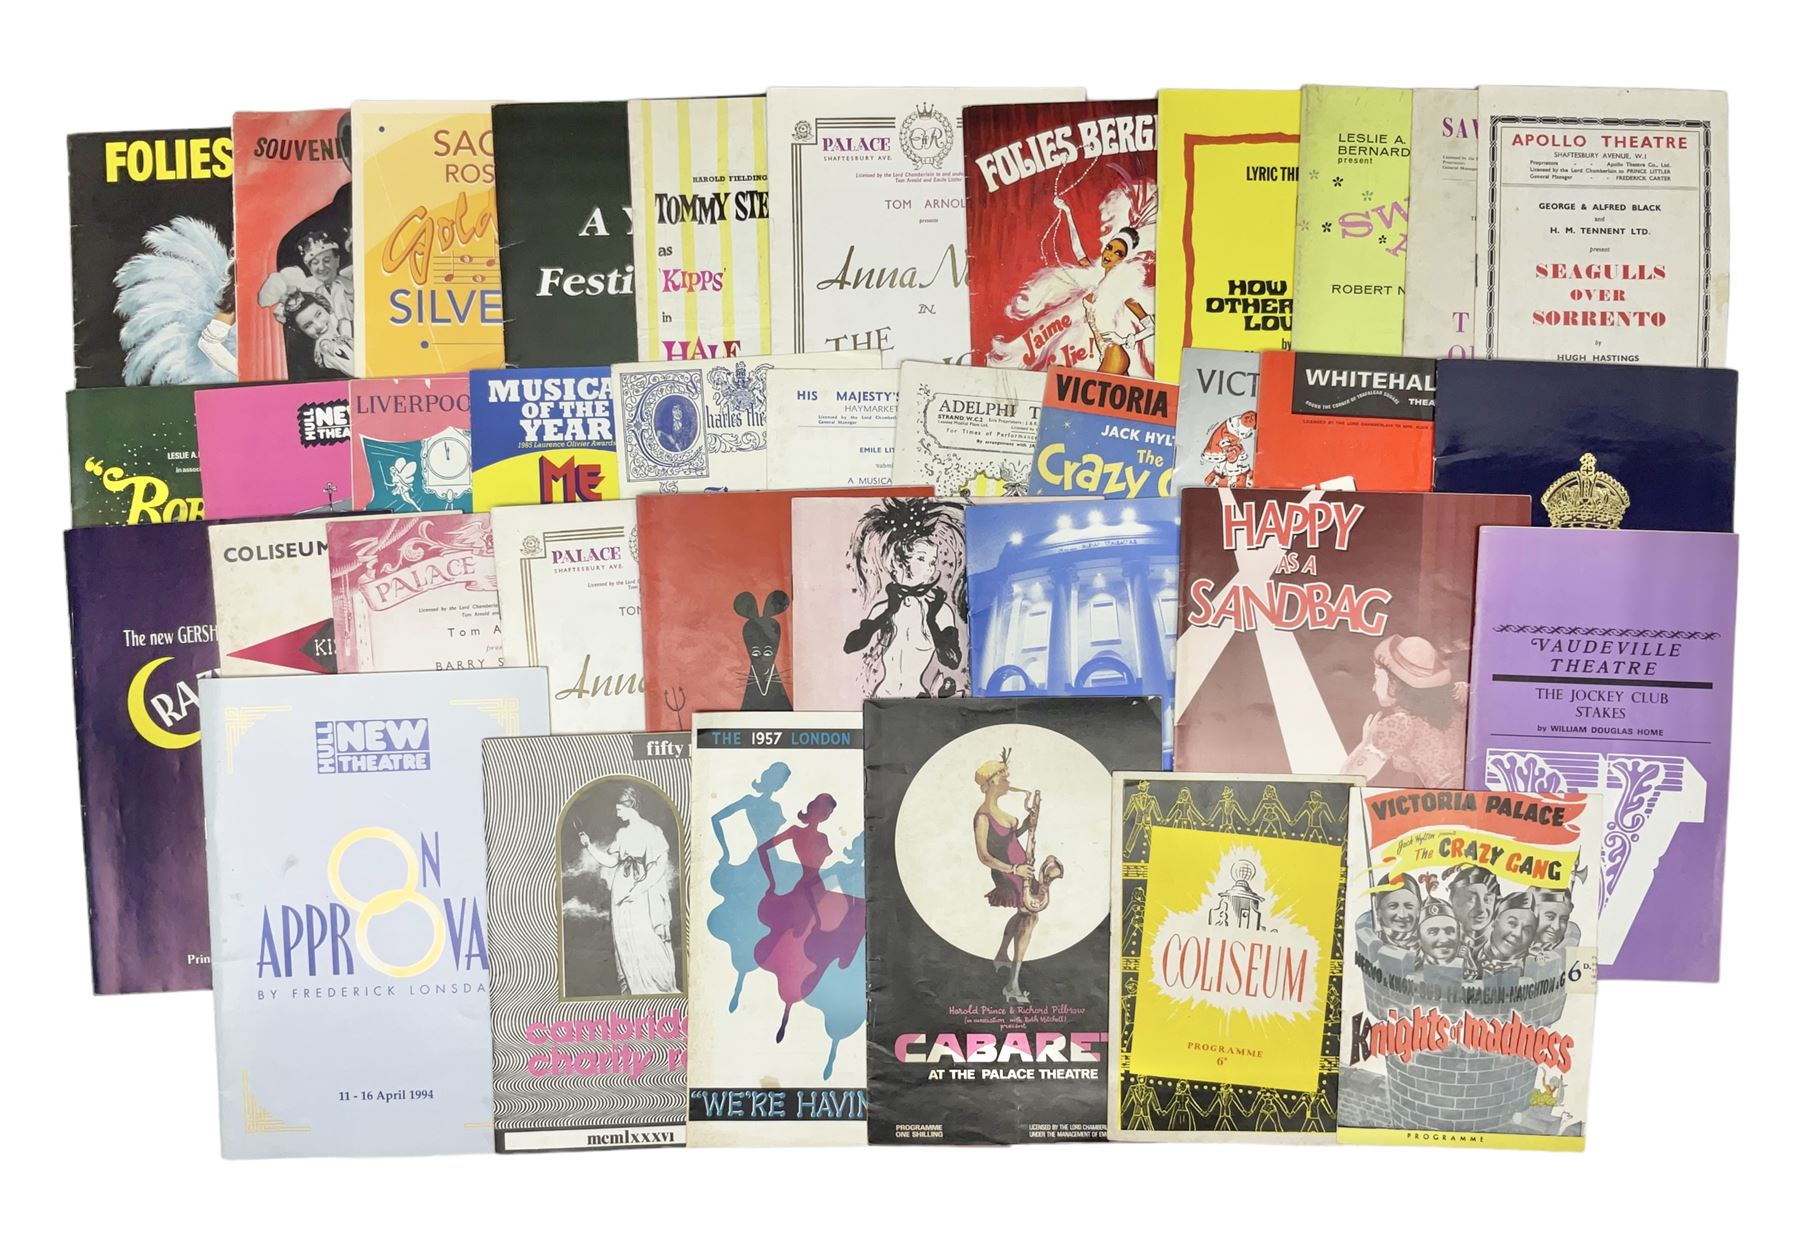 Over thirty theatre programmes 1940s and later including various London theatres - Apollo